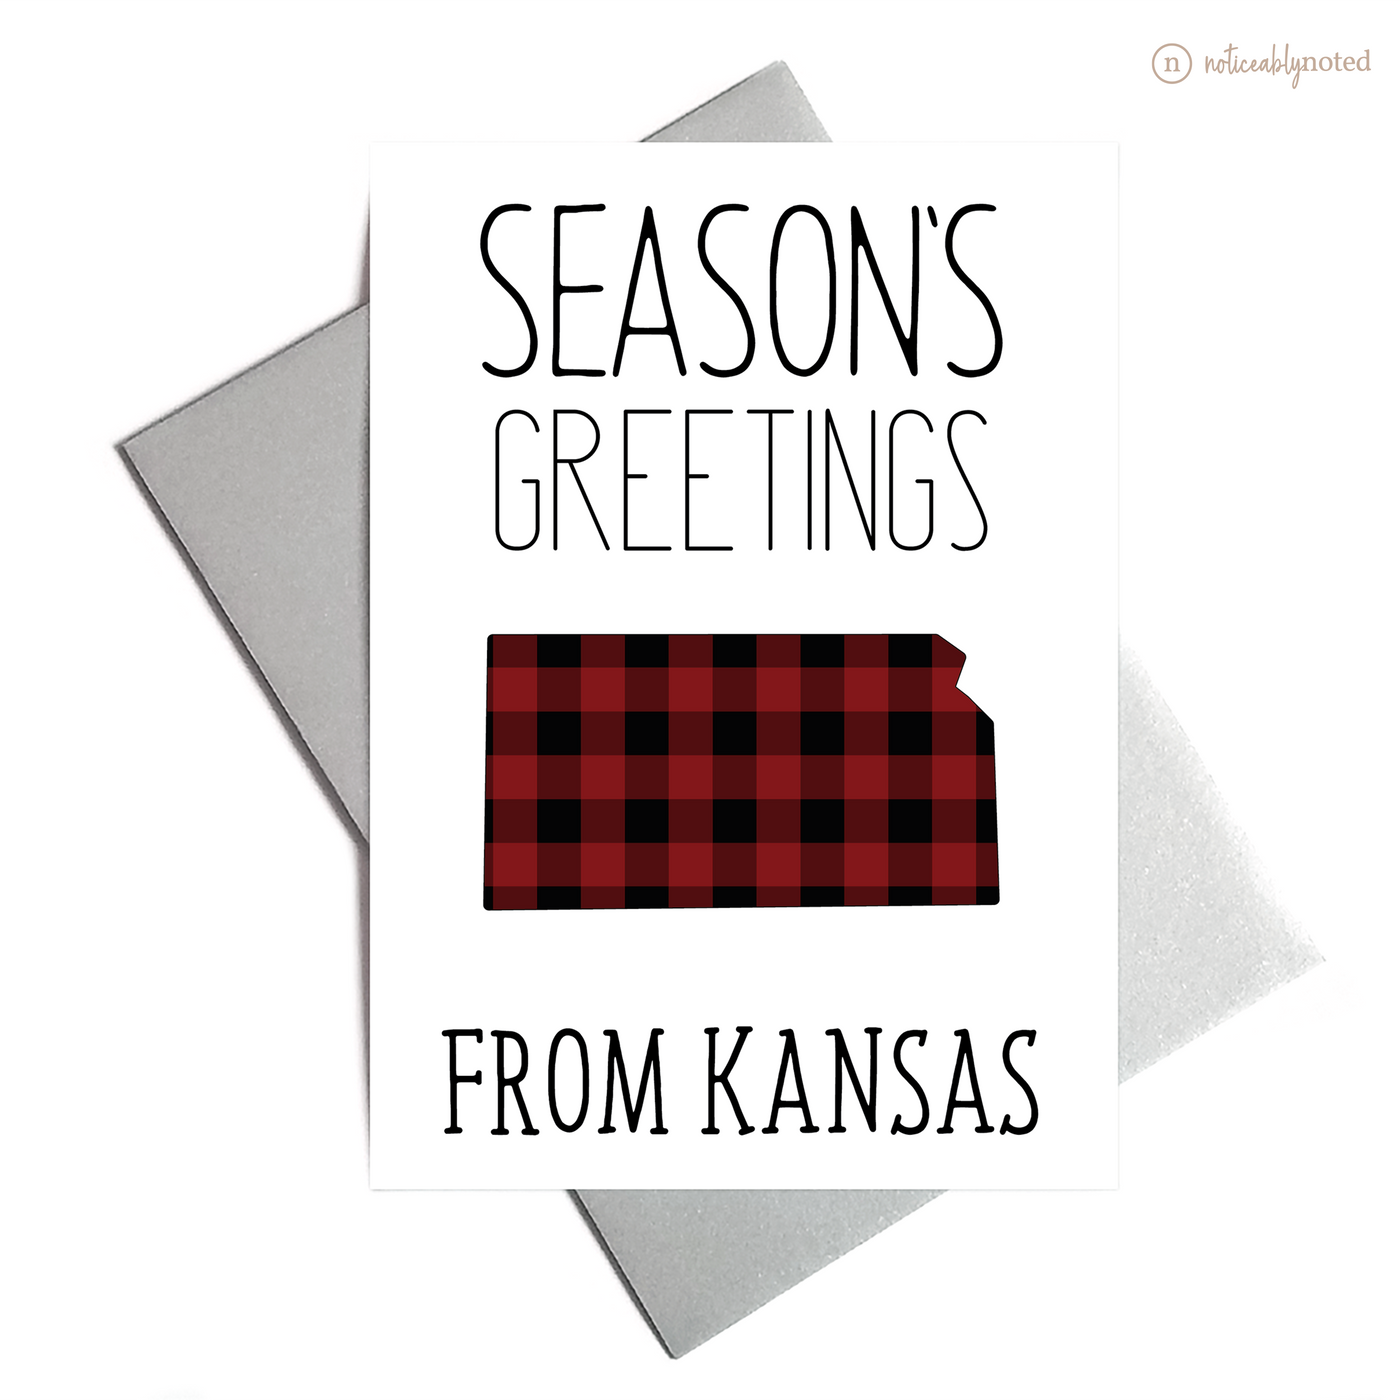 Kansas Christmas Cards | Noticeably Noted